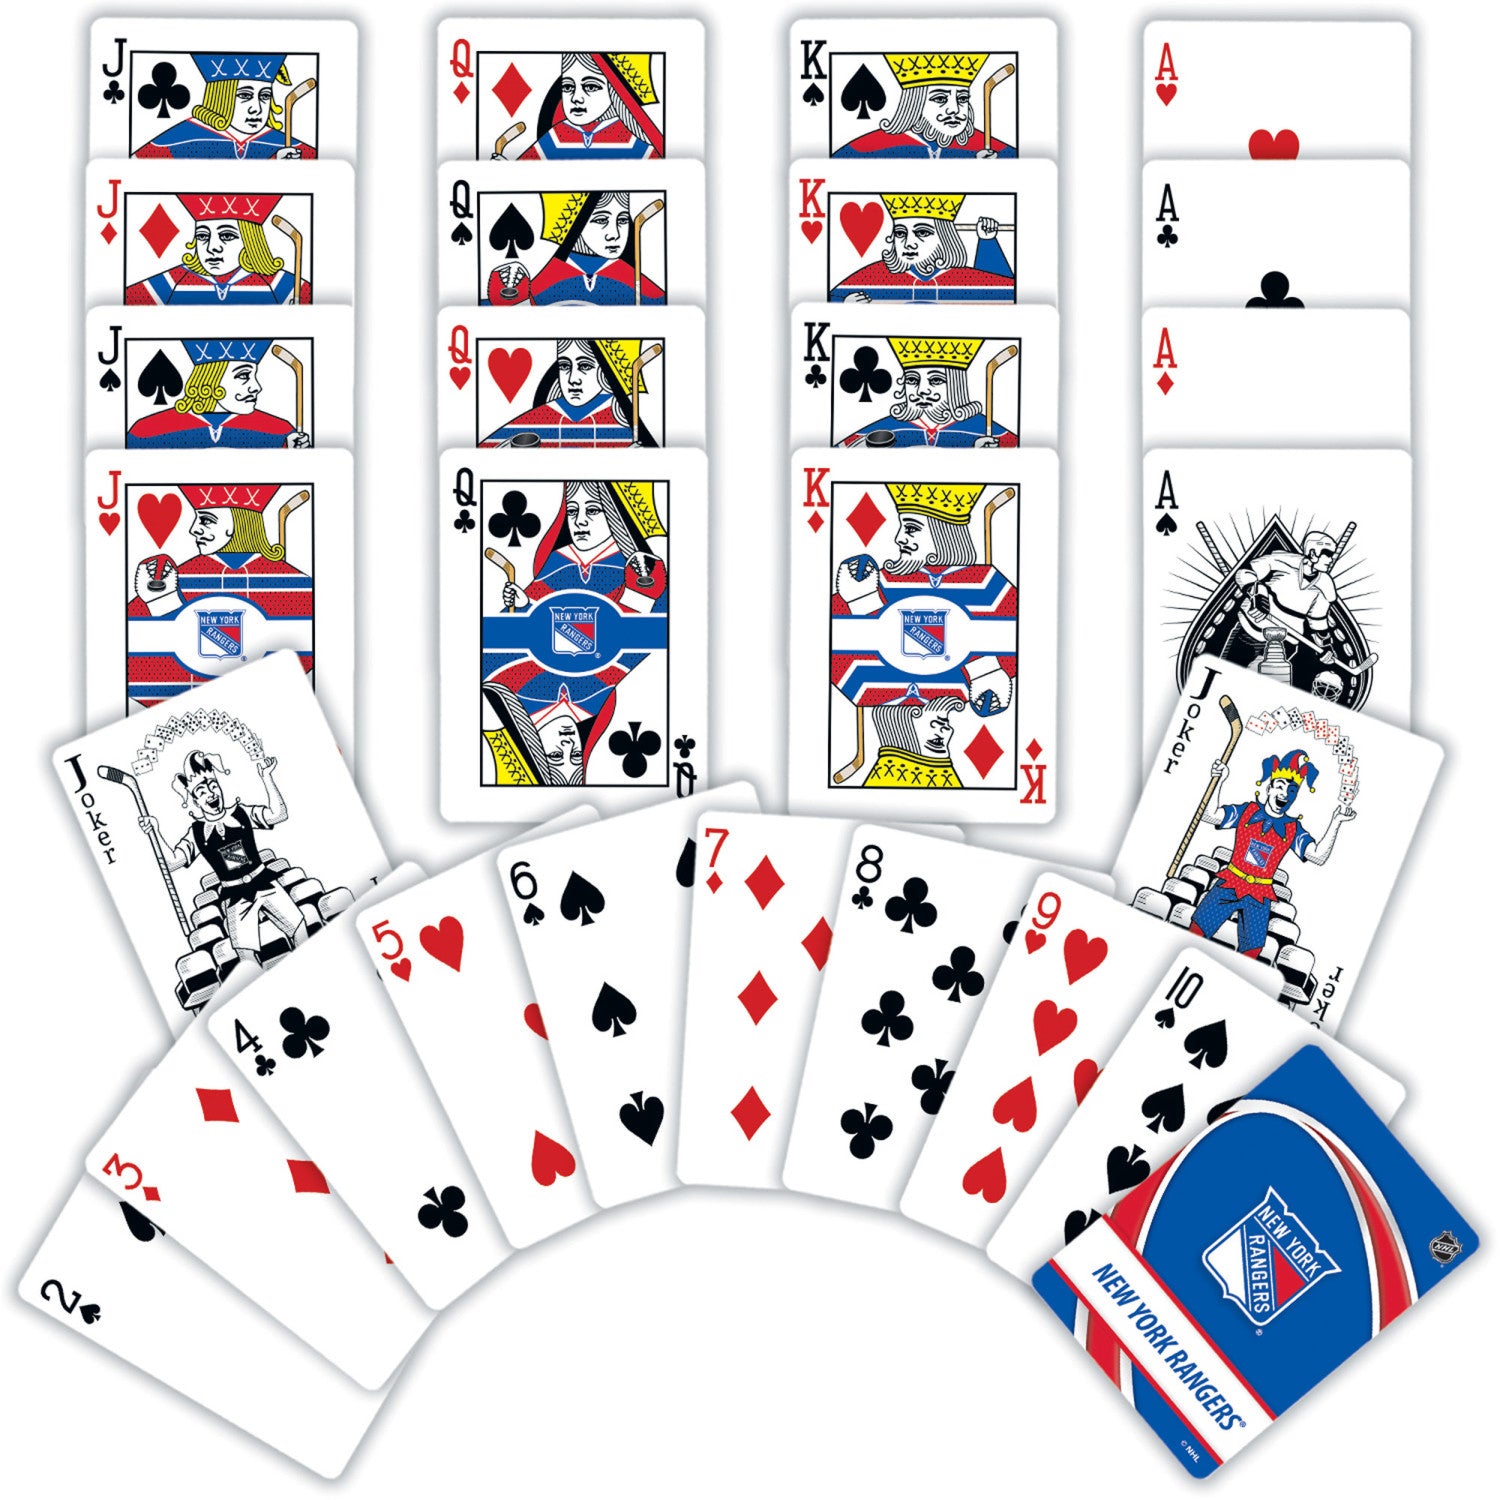 New York Rangers NHL Playing Cards